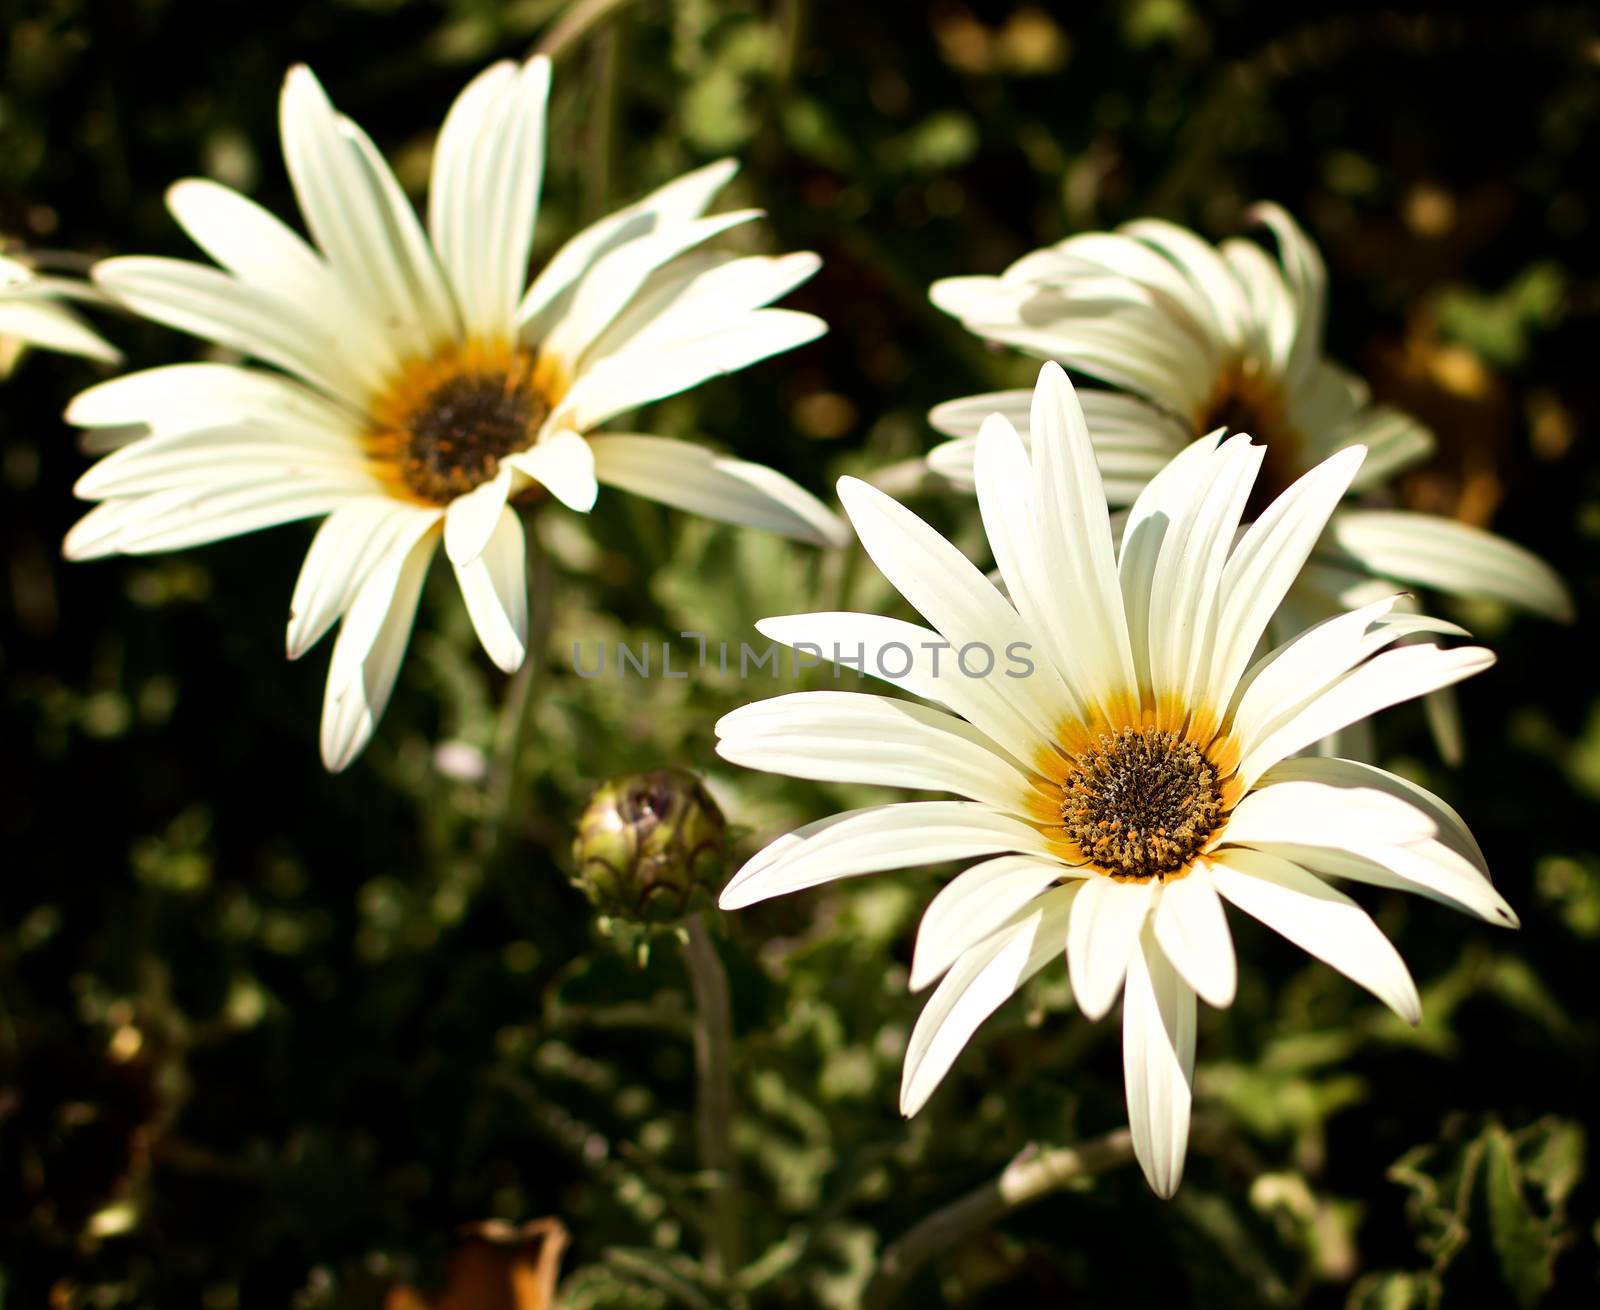 African Daisy Flowers (Arctotis Acaulis) closeup on Leafs and Stems background Outdoors. Focus on Foreground